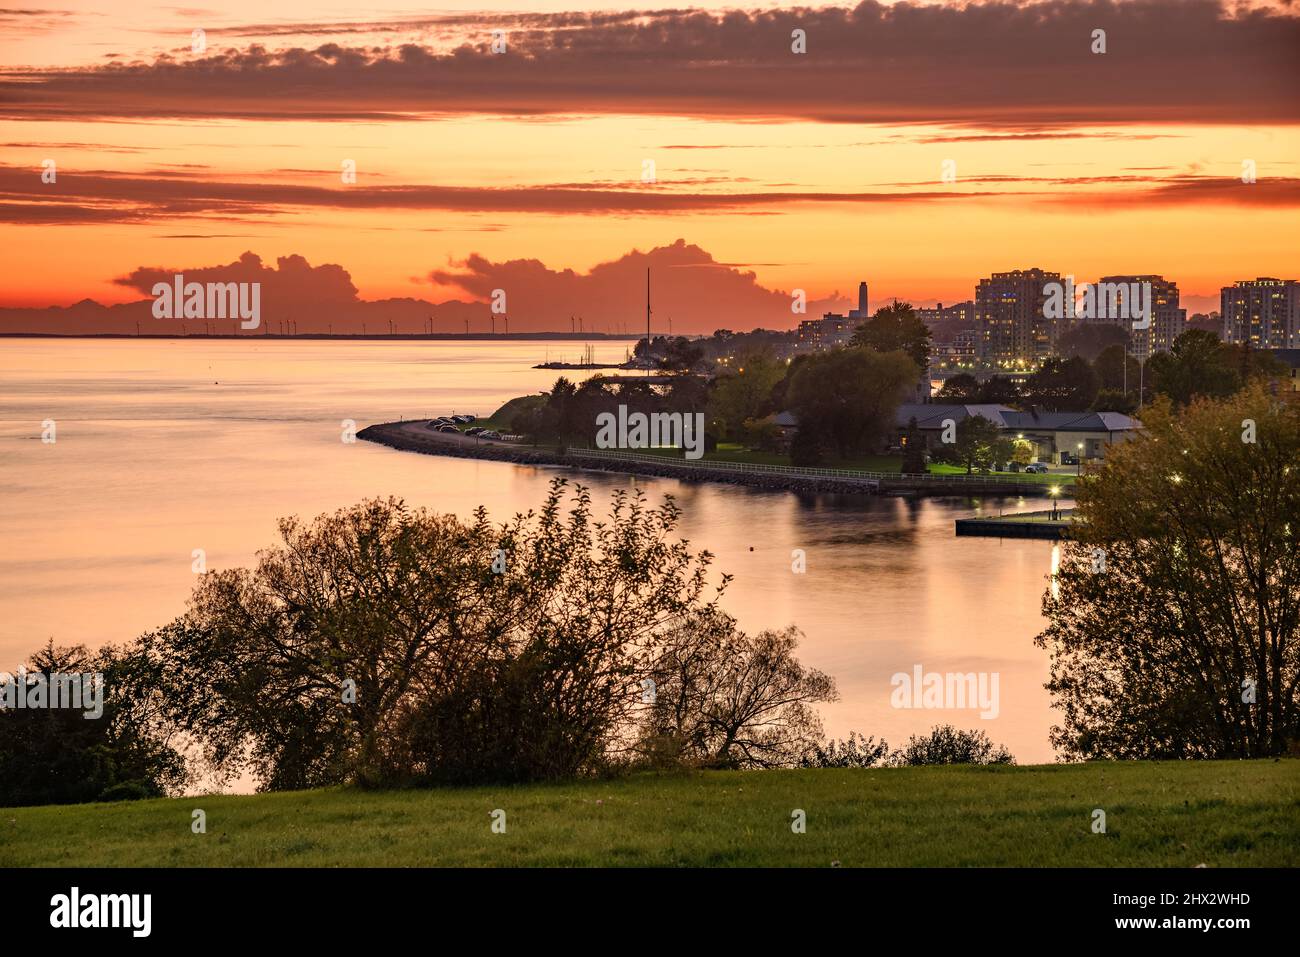 Fiery sunset over a city on a lake. An island dotted with tall wind turbines is visible in background. Stock Photo